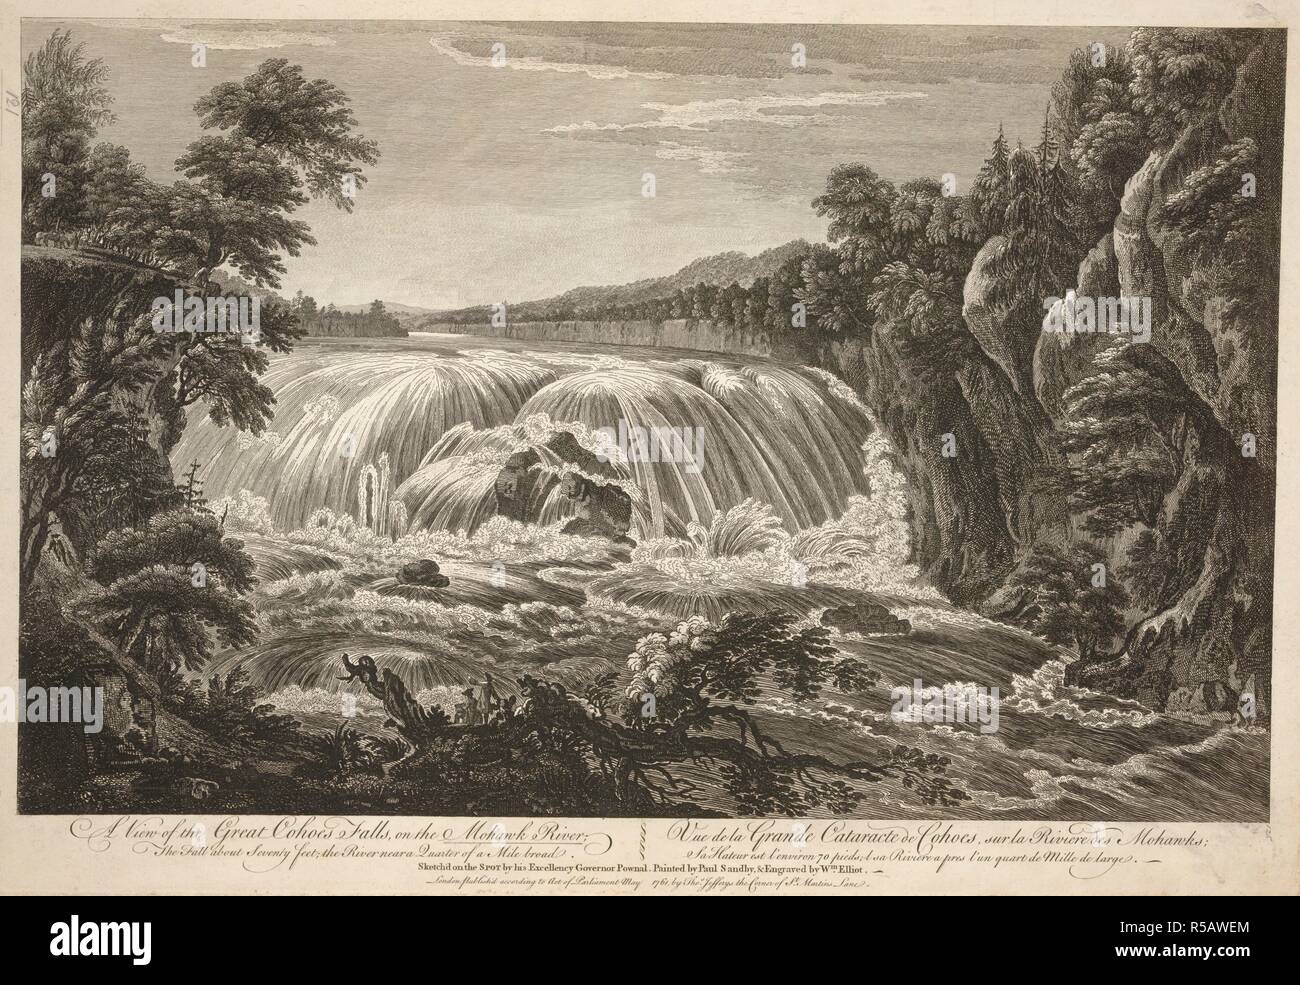 A group of figures stand by a fallen tree in the foreground looking at the waterfall behind, with cliffs and trees on both banks of the Mohawk River and forests in the background . A View of the Great Cohoes Falls, on the Mohawk River = Vue de la Grande Cataracte de Cohoes, sur la Riviere des Mohawks. London : publish'd according to Act of Parliament. May 1761, by Tho.s Jefferys the Corner of St. Martin's Lane, [May 1761]. Etching and engraving. Source: Maps K.Top.121.117. Language: English and French. Author: SANDBY, PAUL. Stock Photo